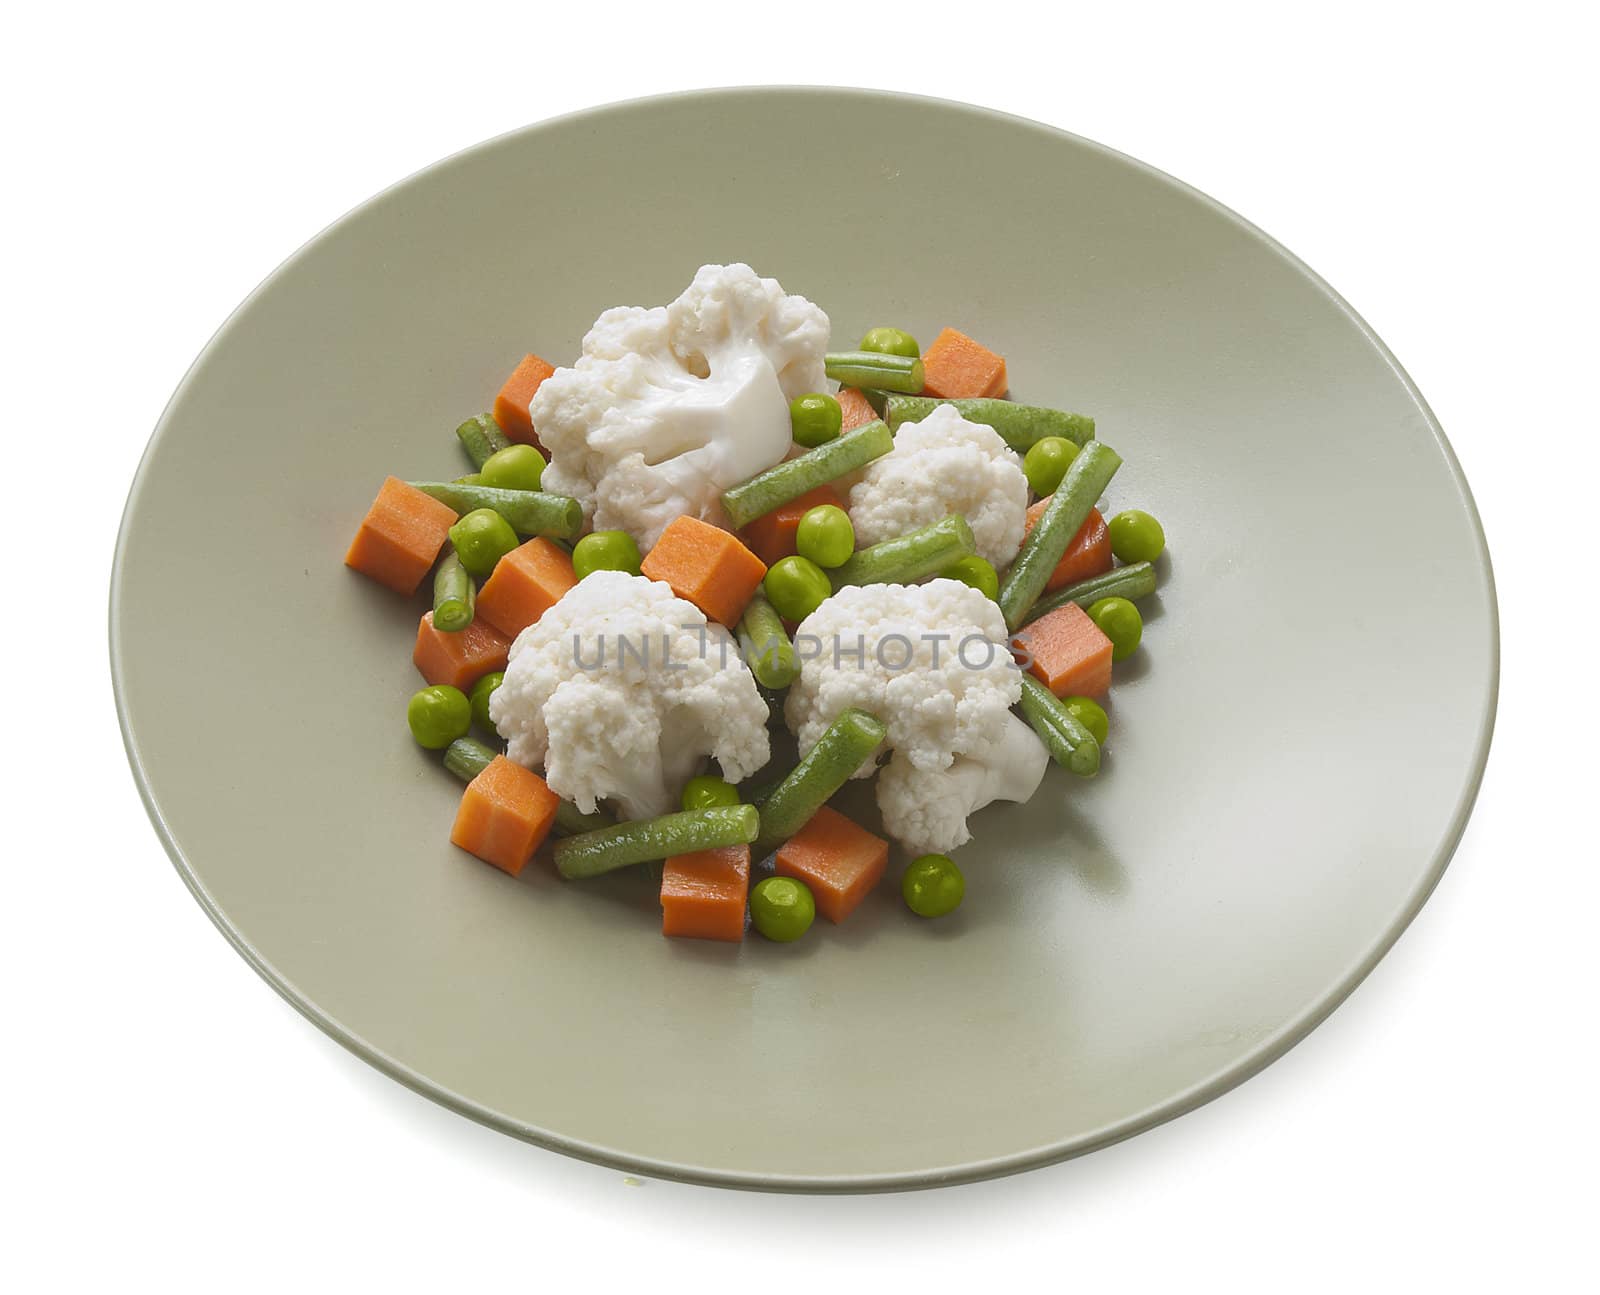 Vegetable mix with cauliflower, carrot, peas and kidney bean on the green plate